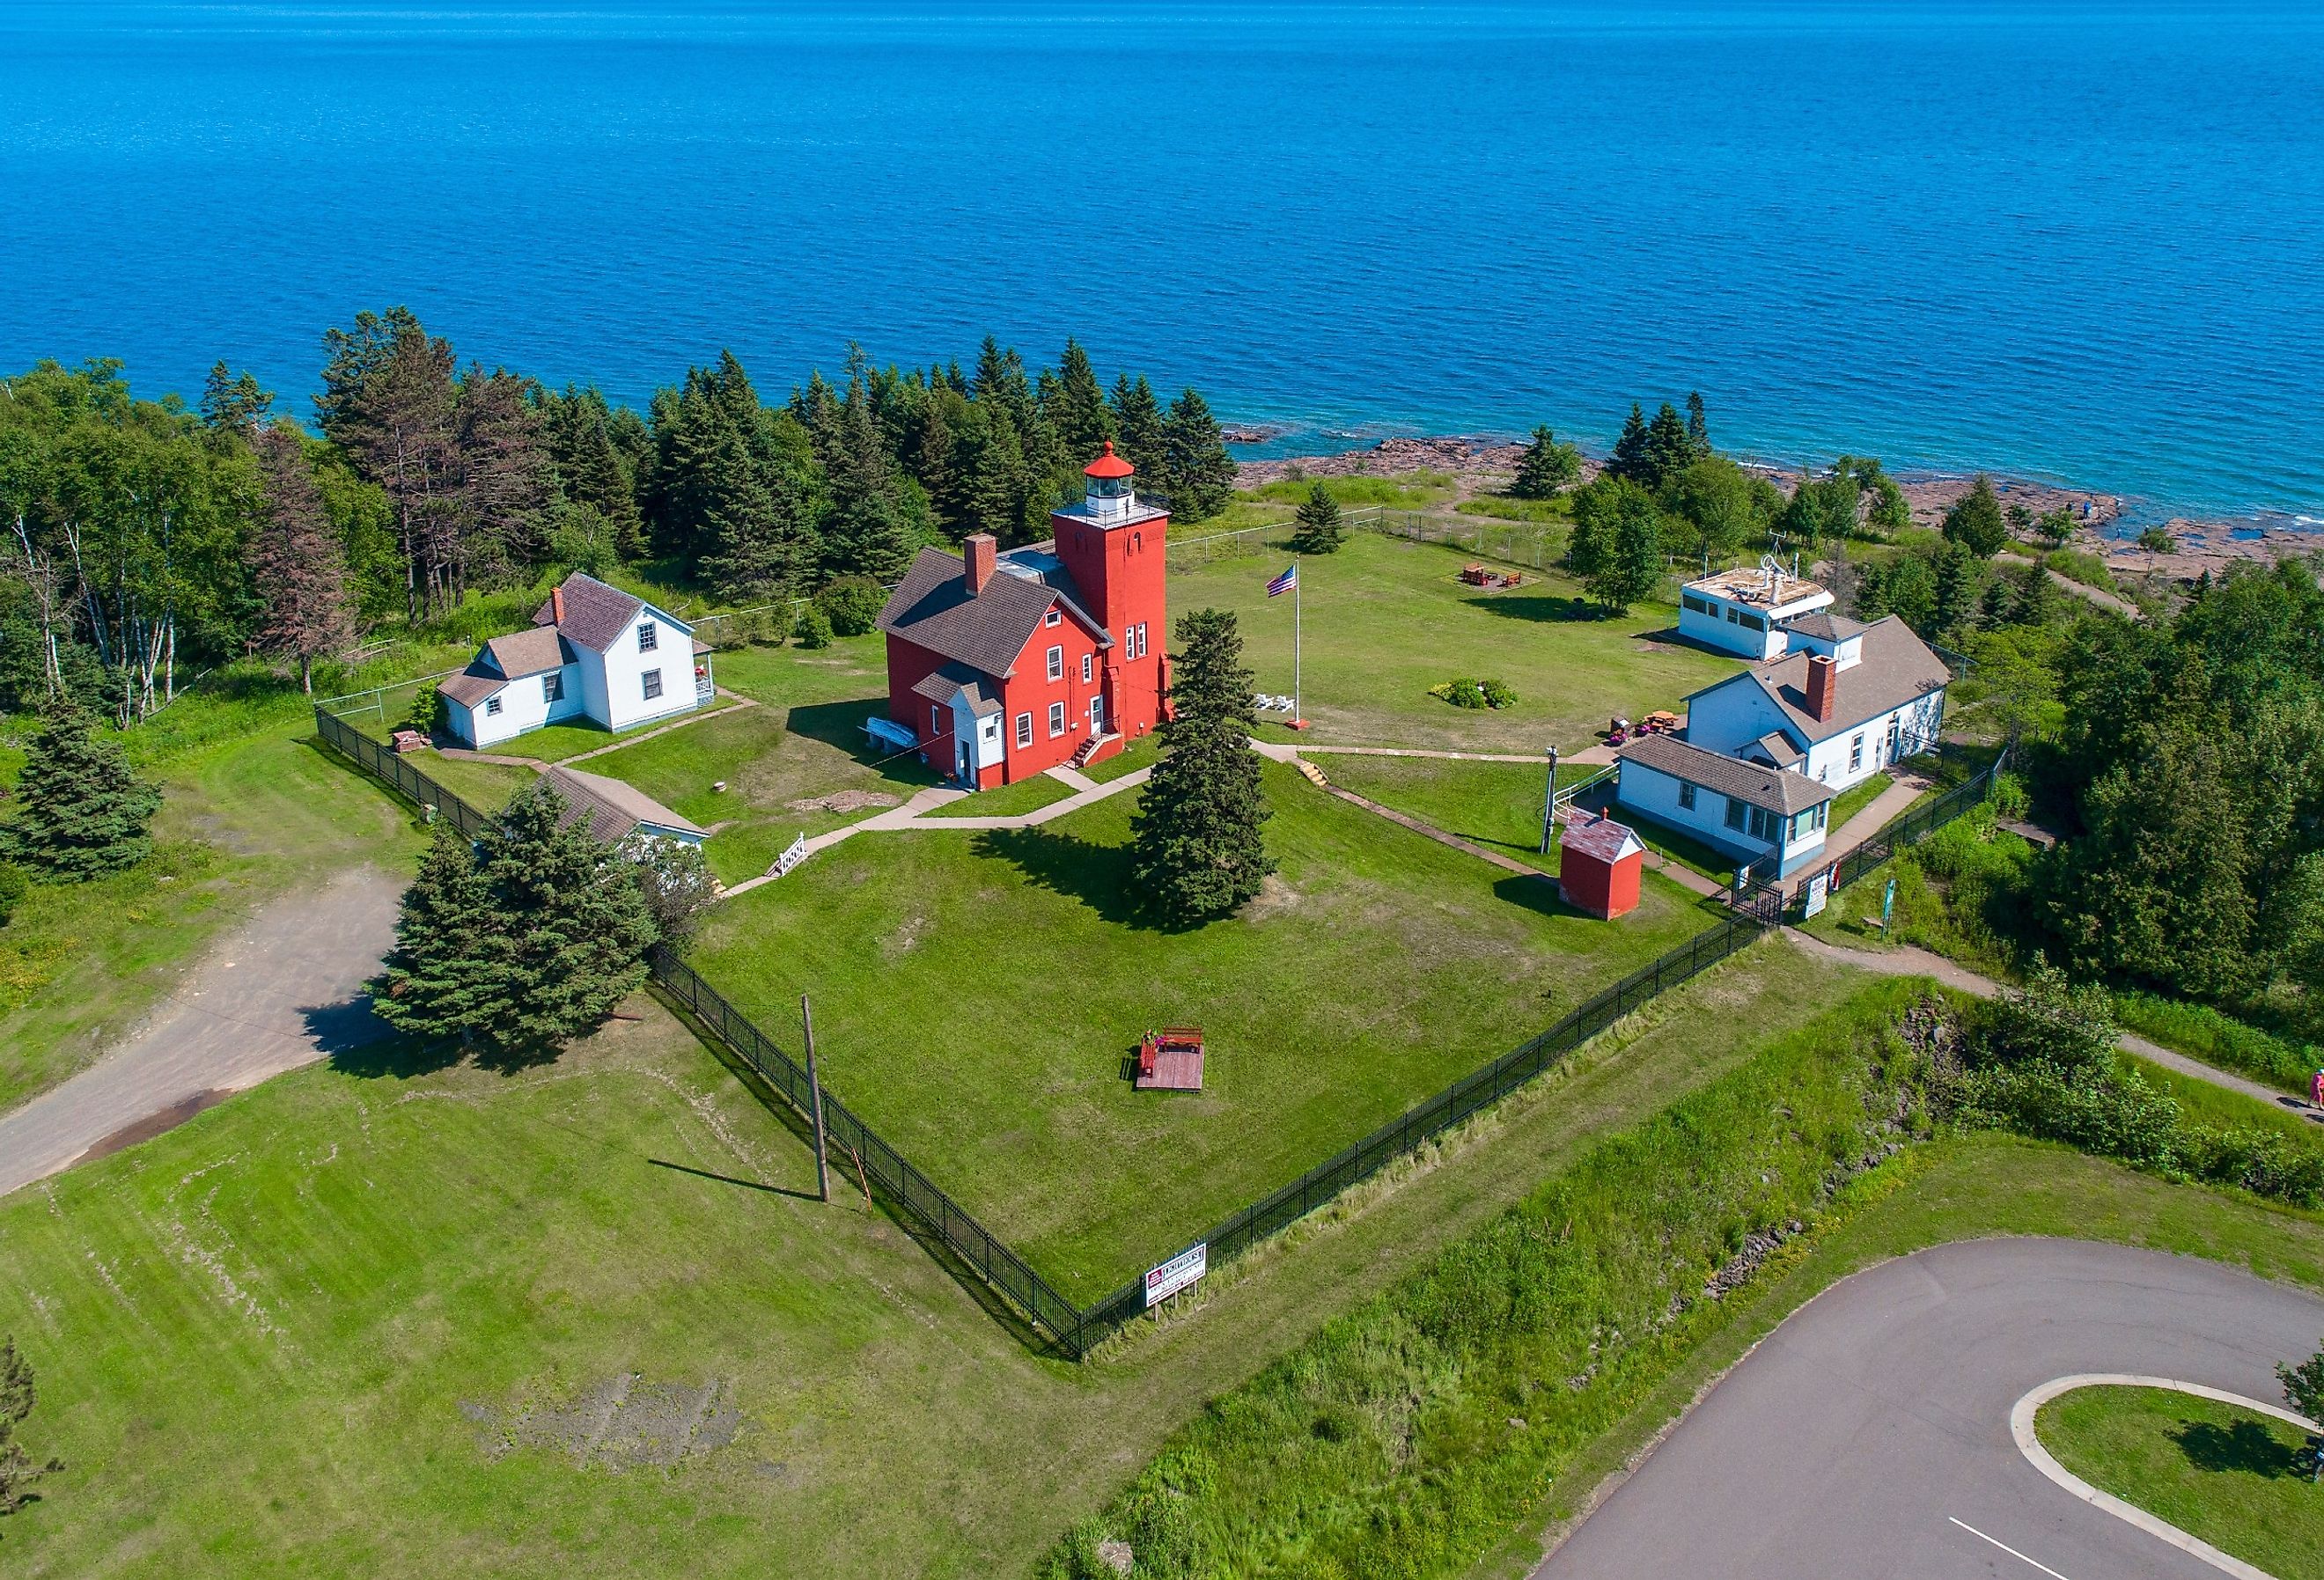 The Two Harbors Light Station is the oldest operating lighthouse in the US state of Minnesota. Image credit Dennis MacDonald via Shutterstock